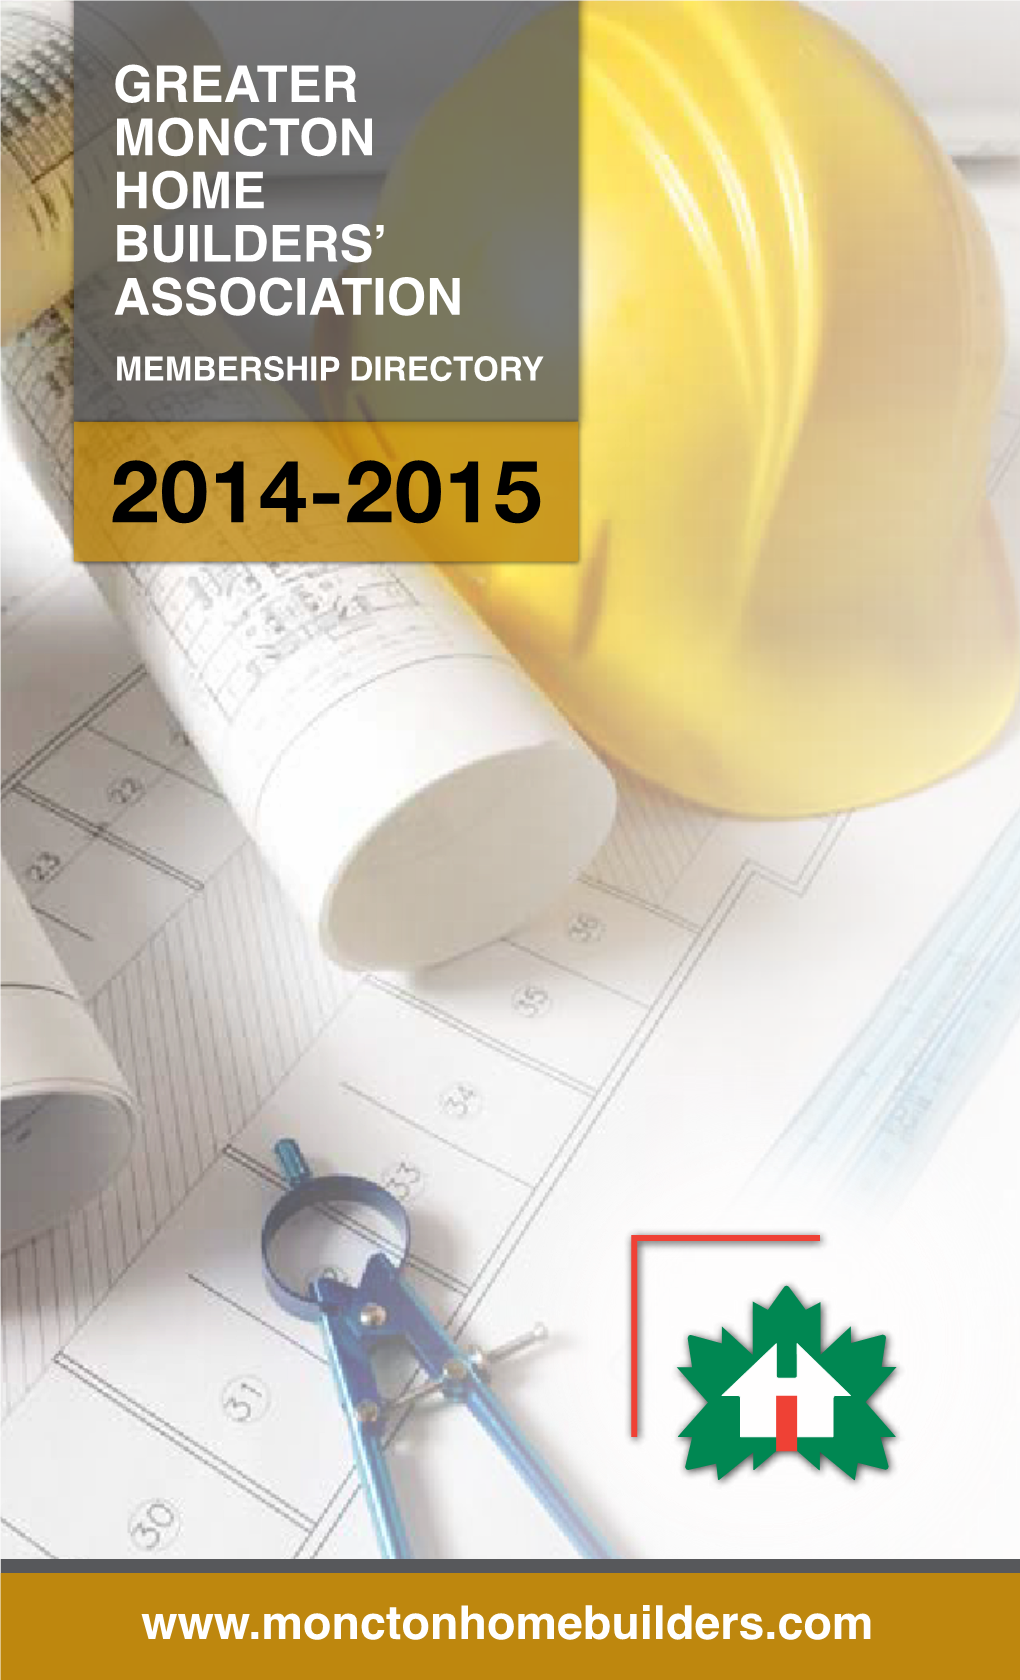 Greater Moncton Home Builders Association Has a Strict Code of Ethics Which Our Members Must Adhere To